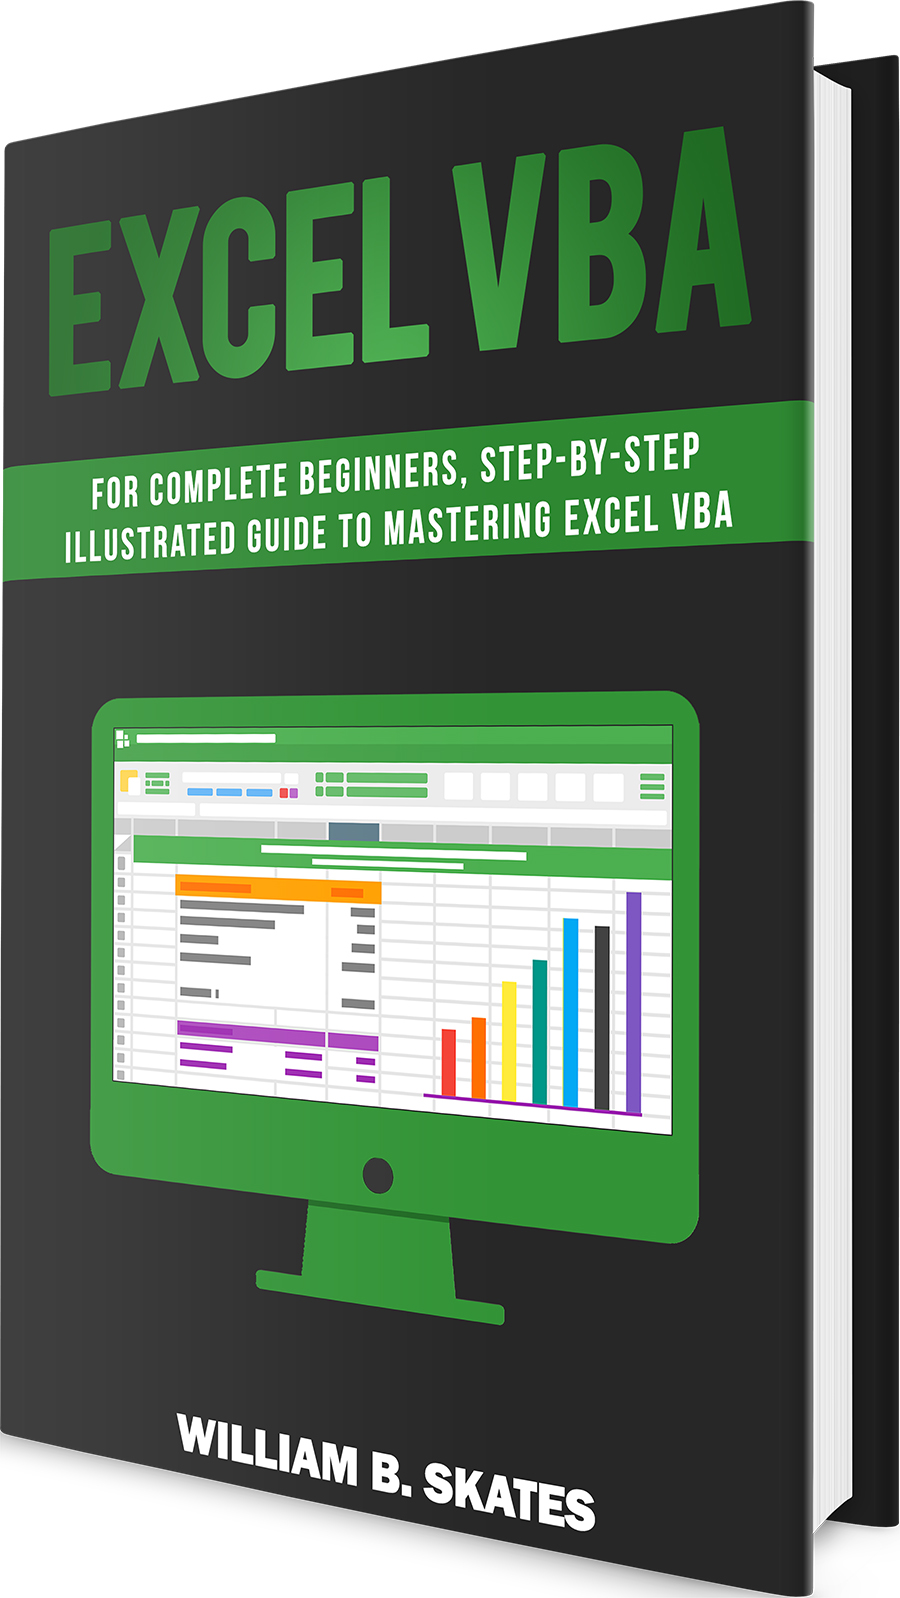 FREE: Excel VBA: Programming For Complete Beginners by William B. Skates